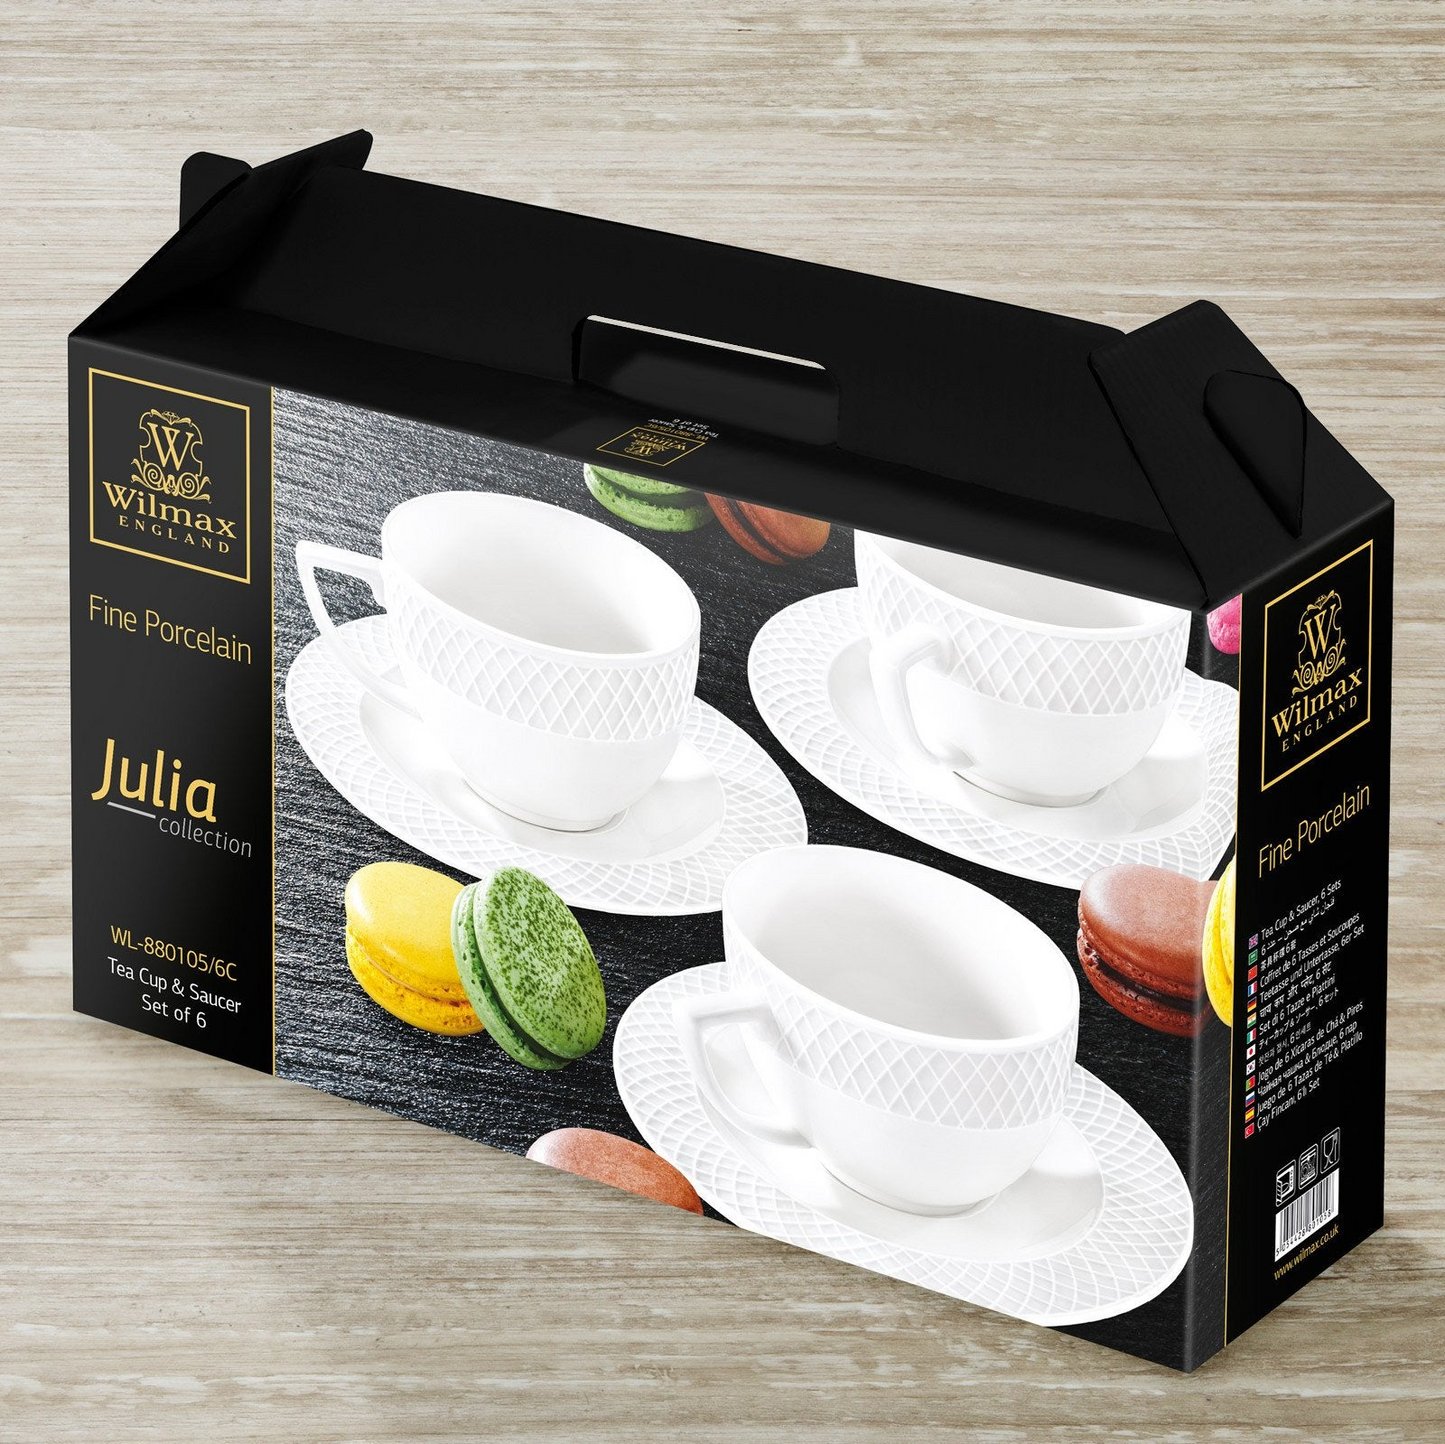 Wilmax [A] Fine Porcelain 8 Oz | 240 Ml Tea Cup & 6" Saucer Set Of 6 In Gift Box WL-880105/6C